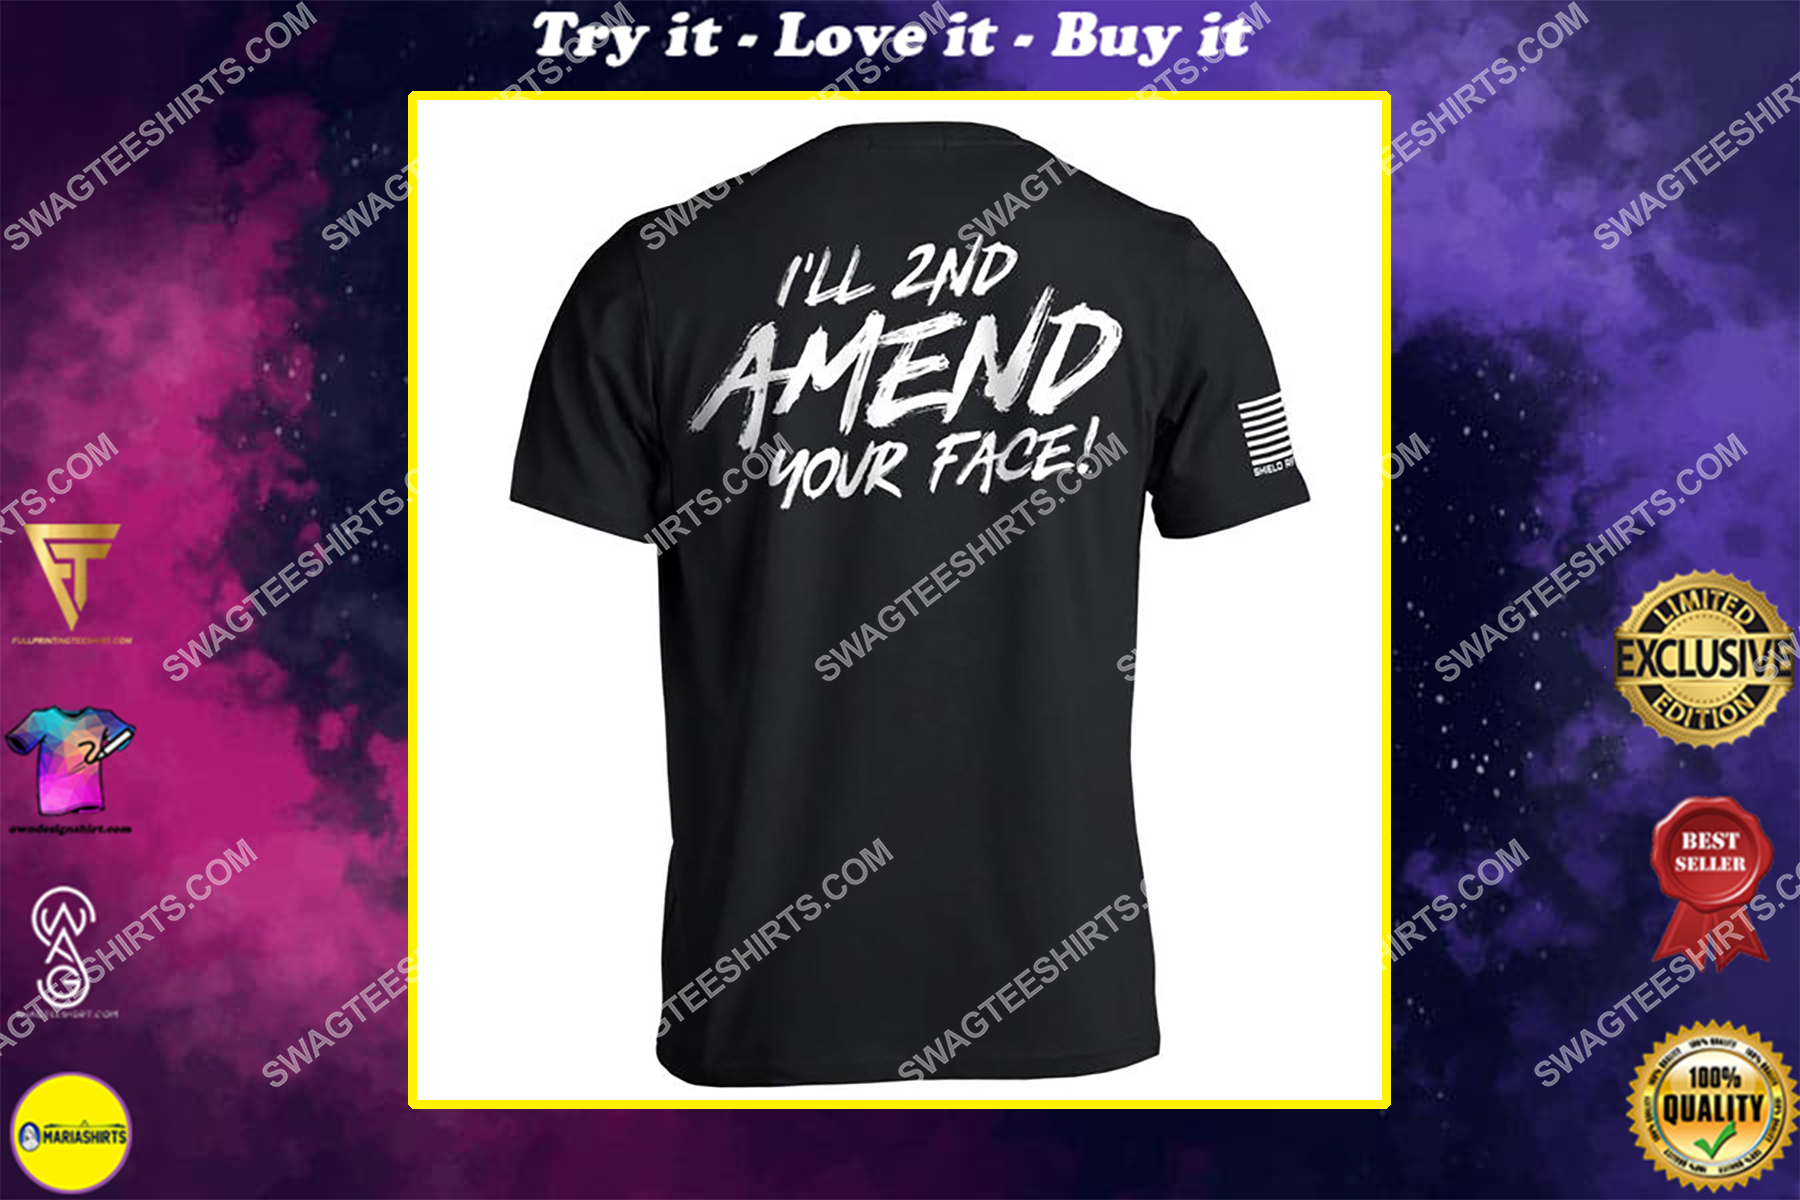 i'll 2nd amend your face political full print shirt